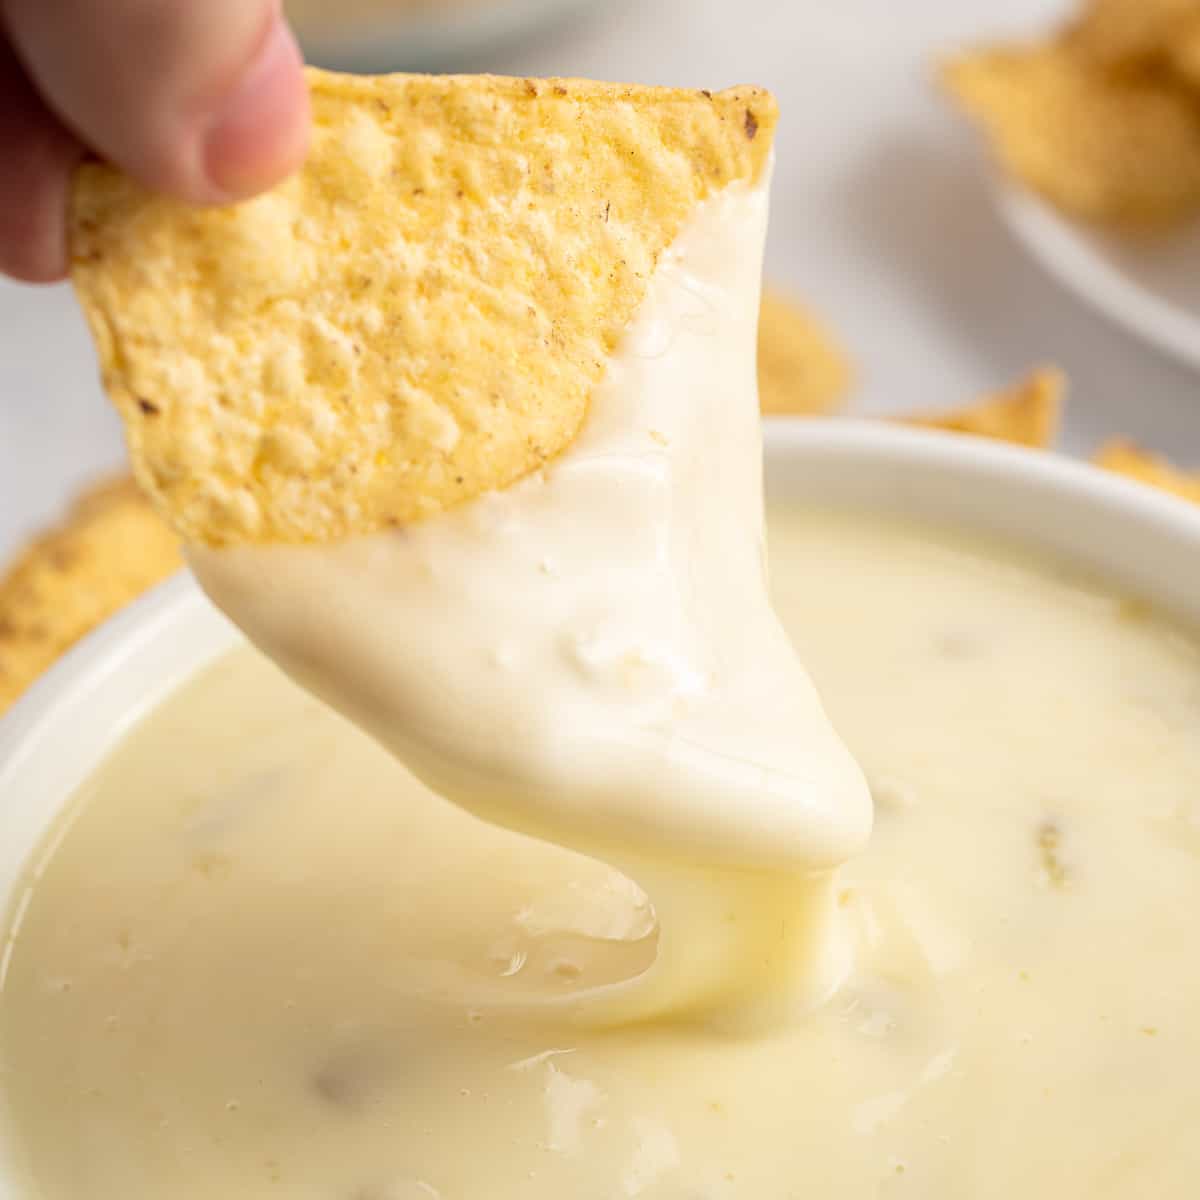 dipping a chip into queso blanco